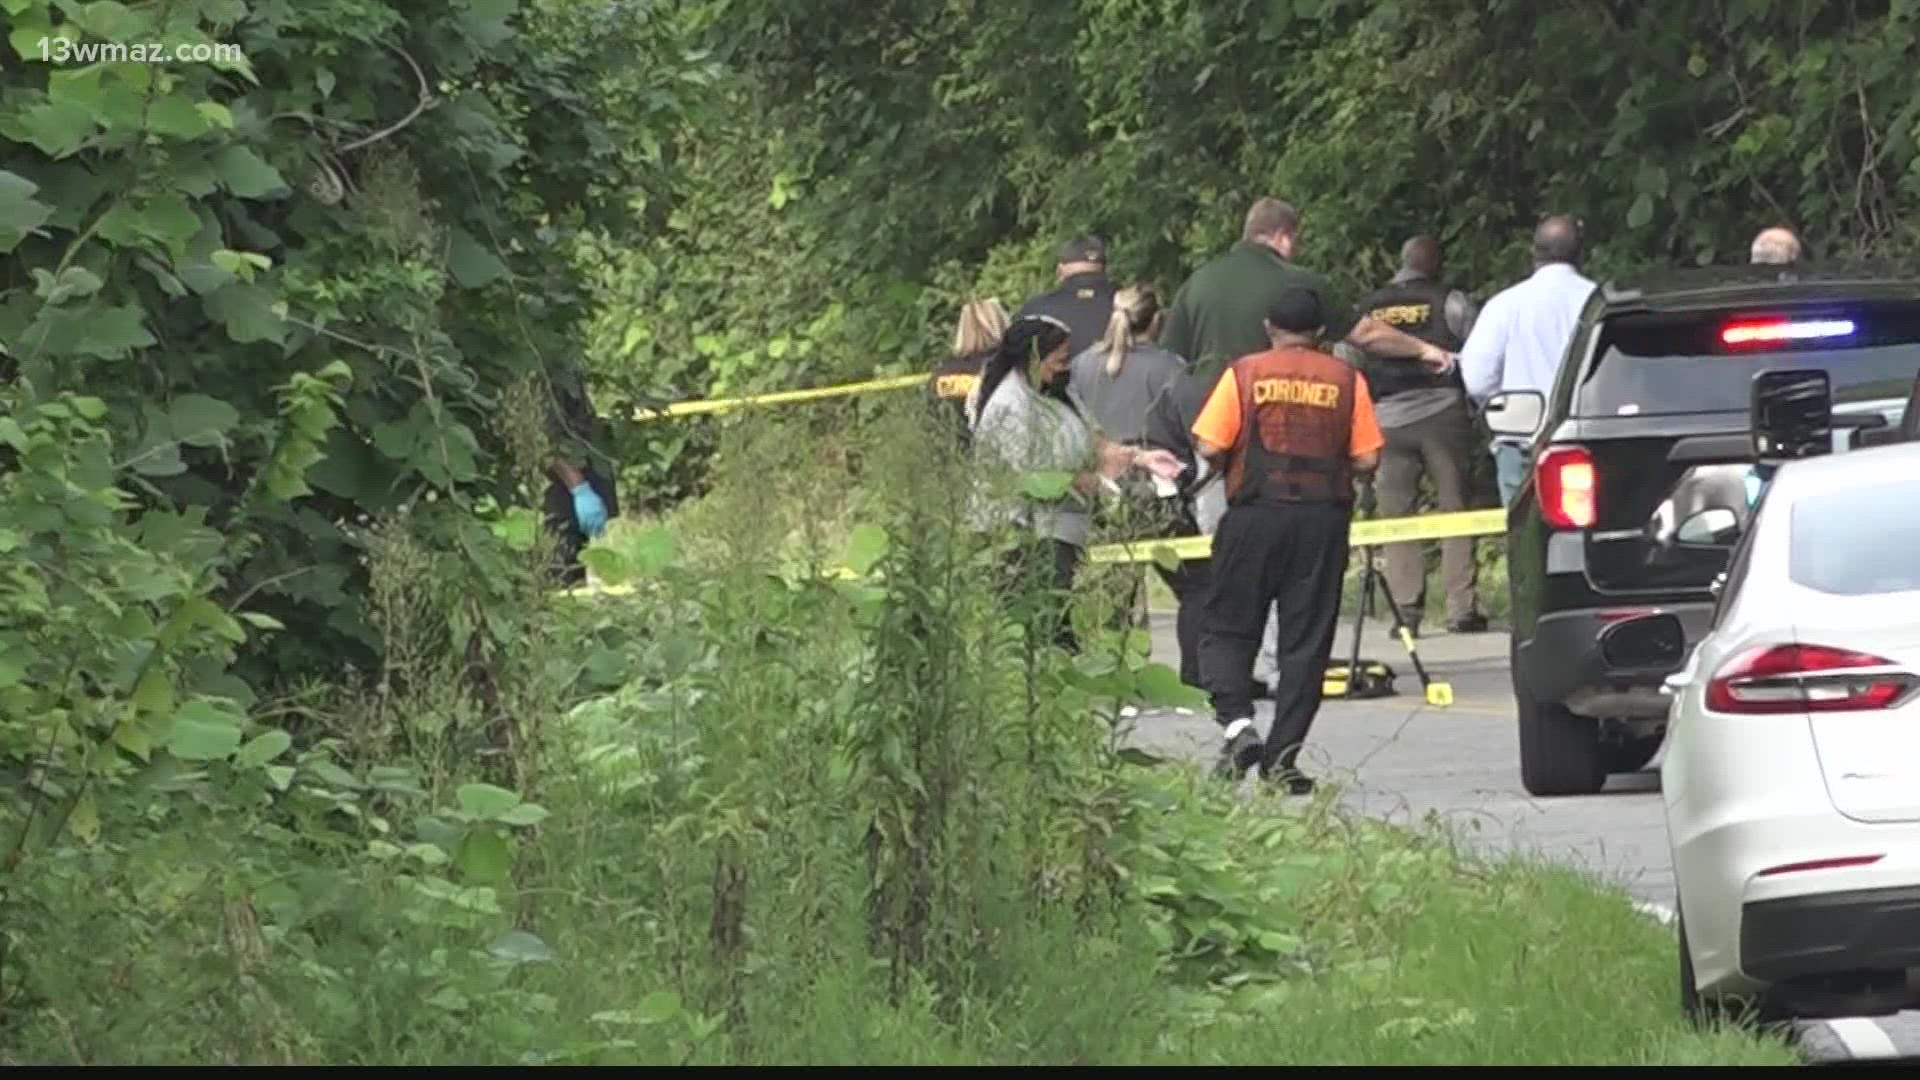 The 24-year-old woman was found on the side of the road with multiple gunshot wounds.